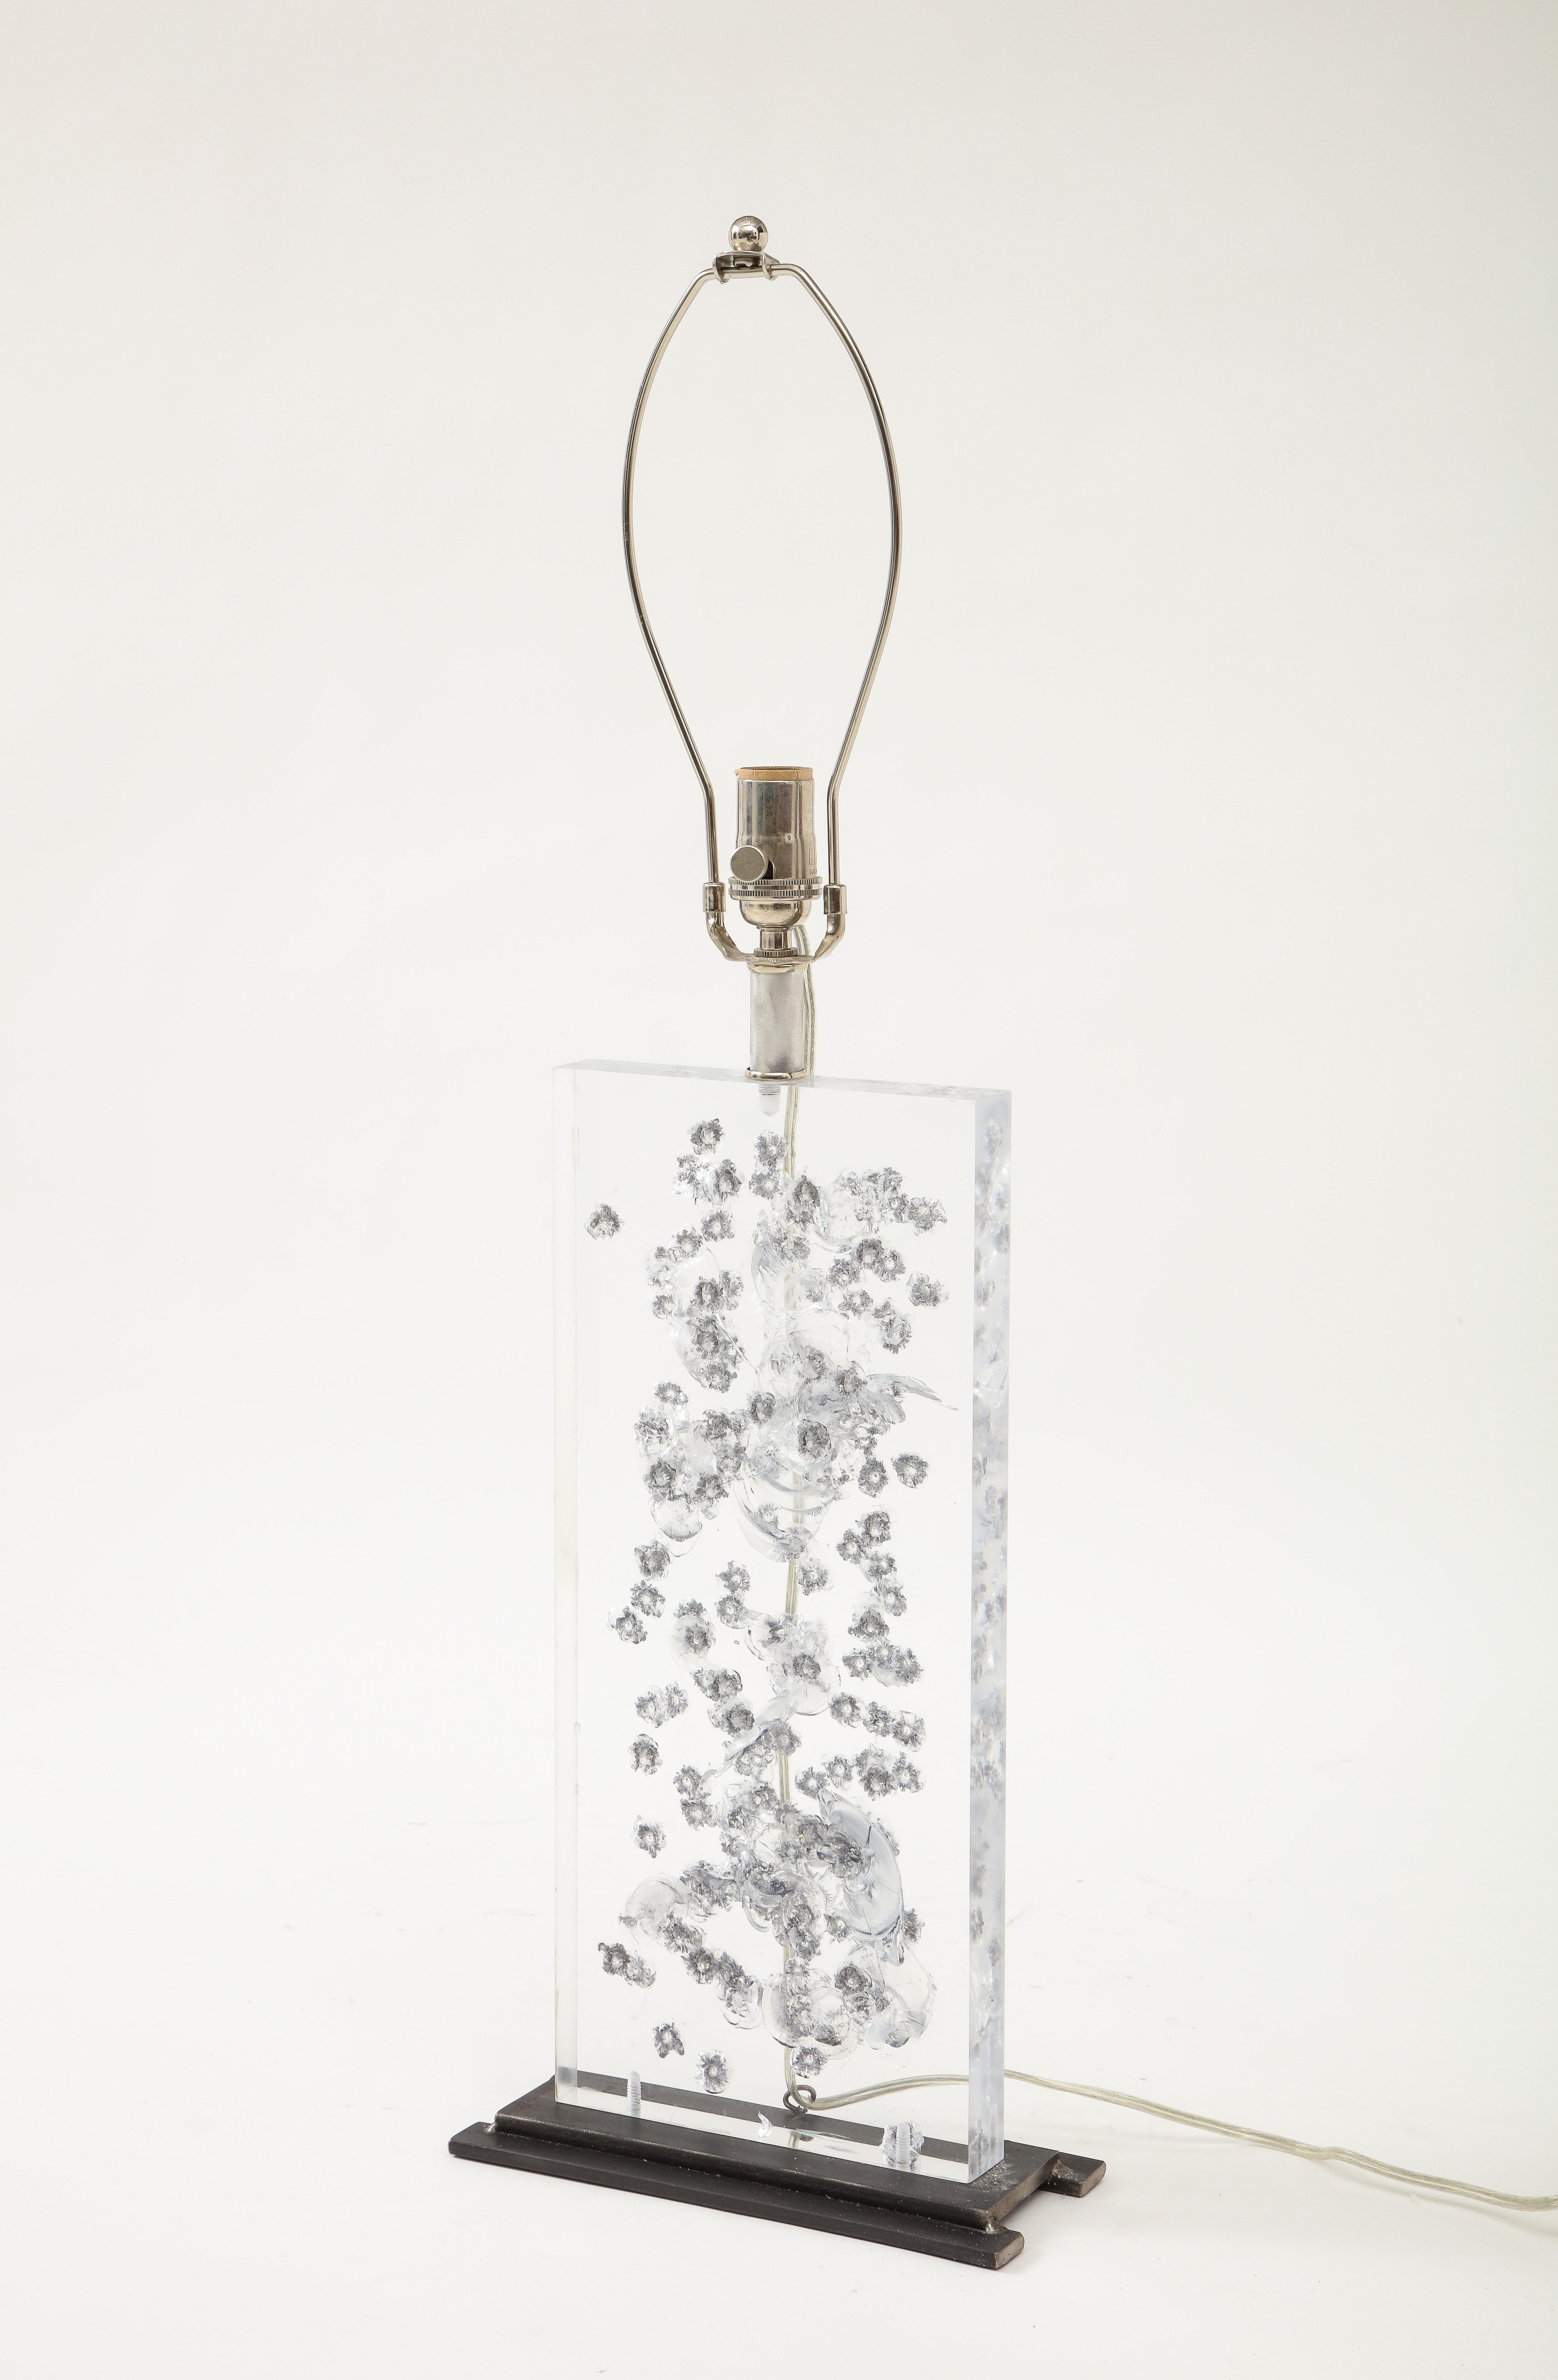 Hand-Crafted Bullet-Proof Plexi Lamp For Sale